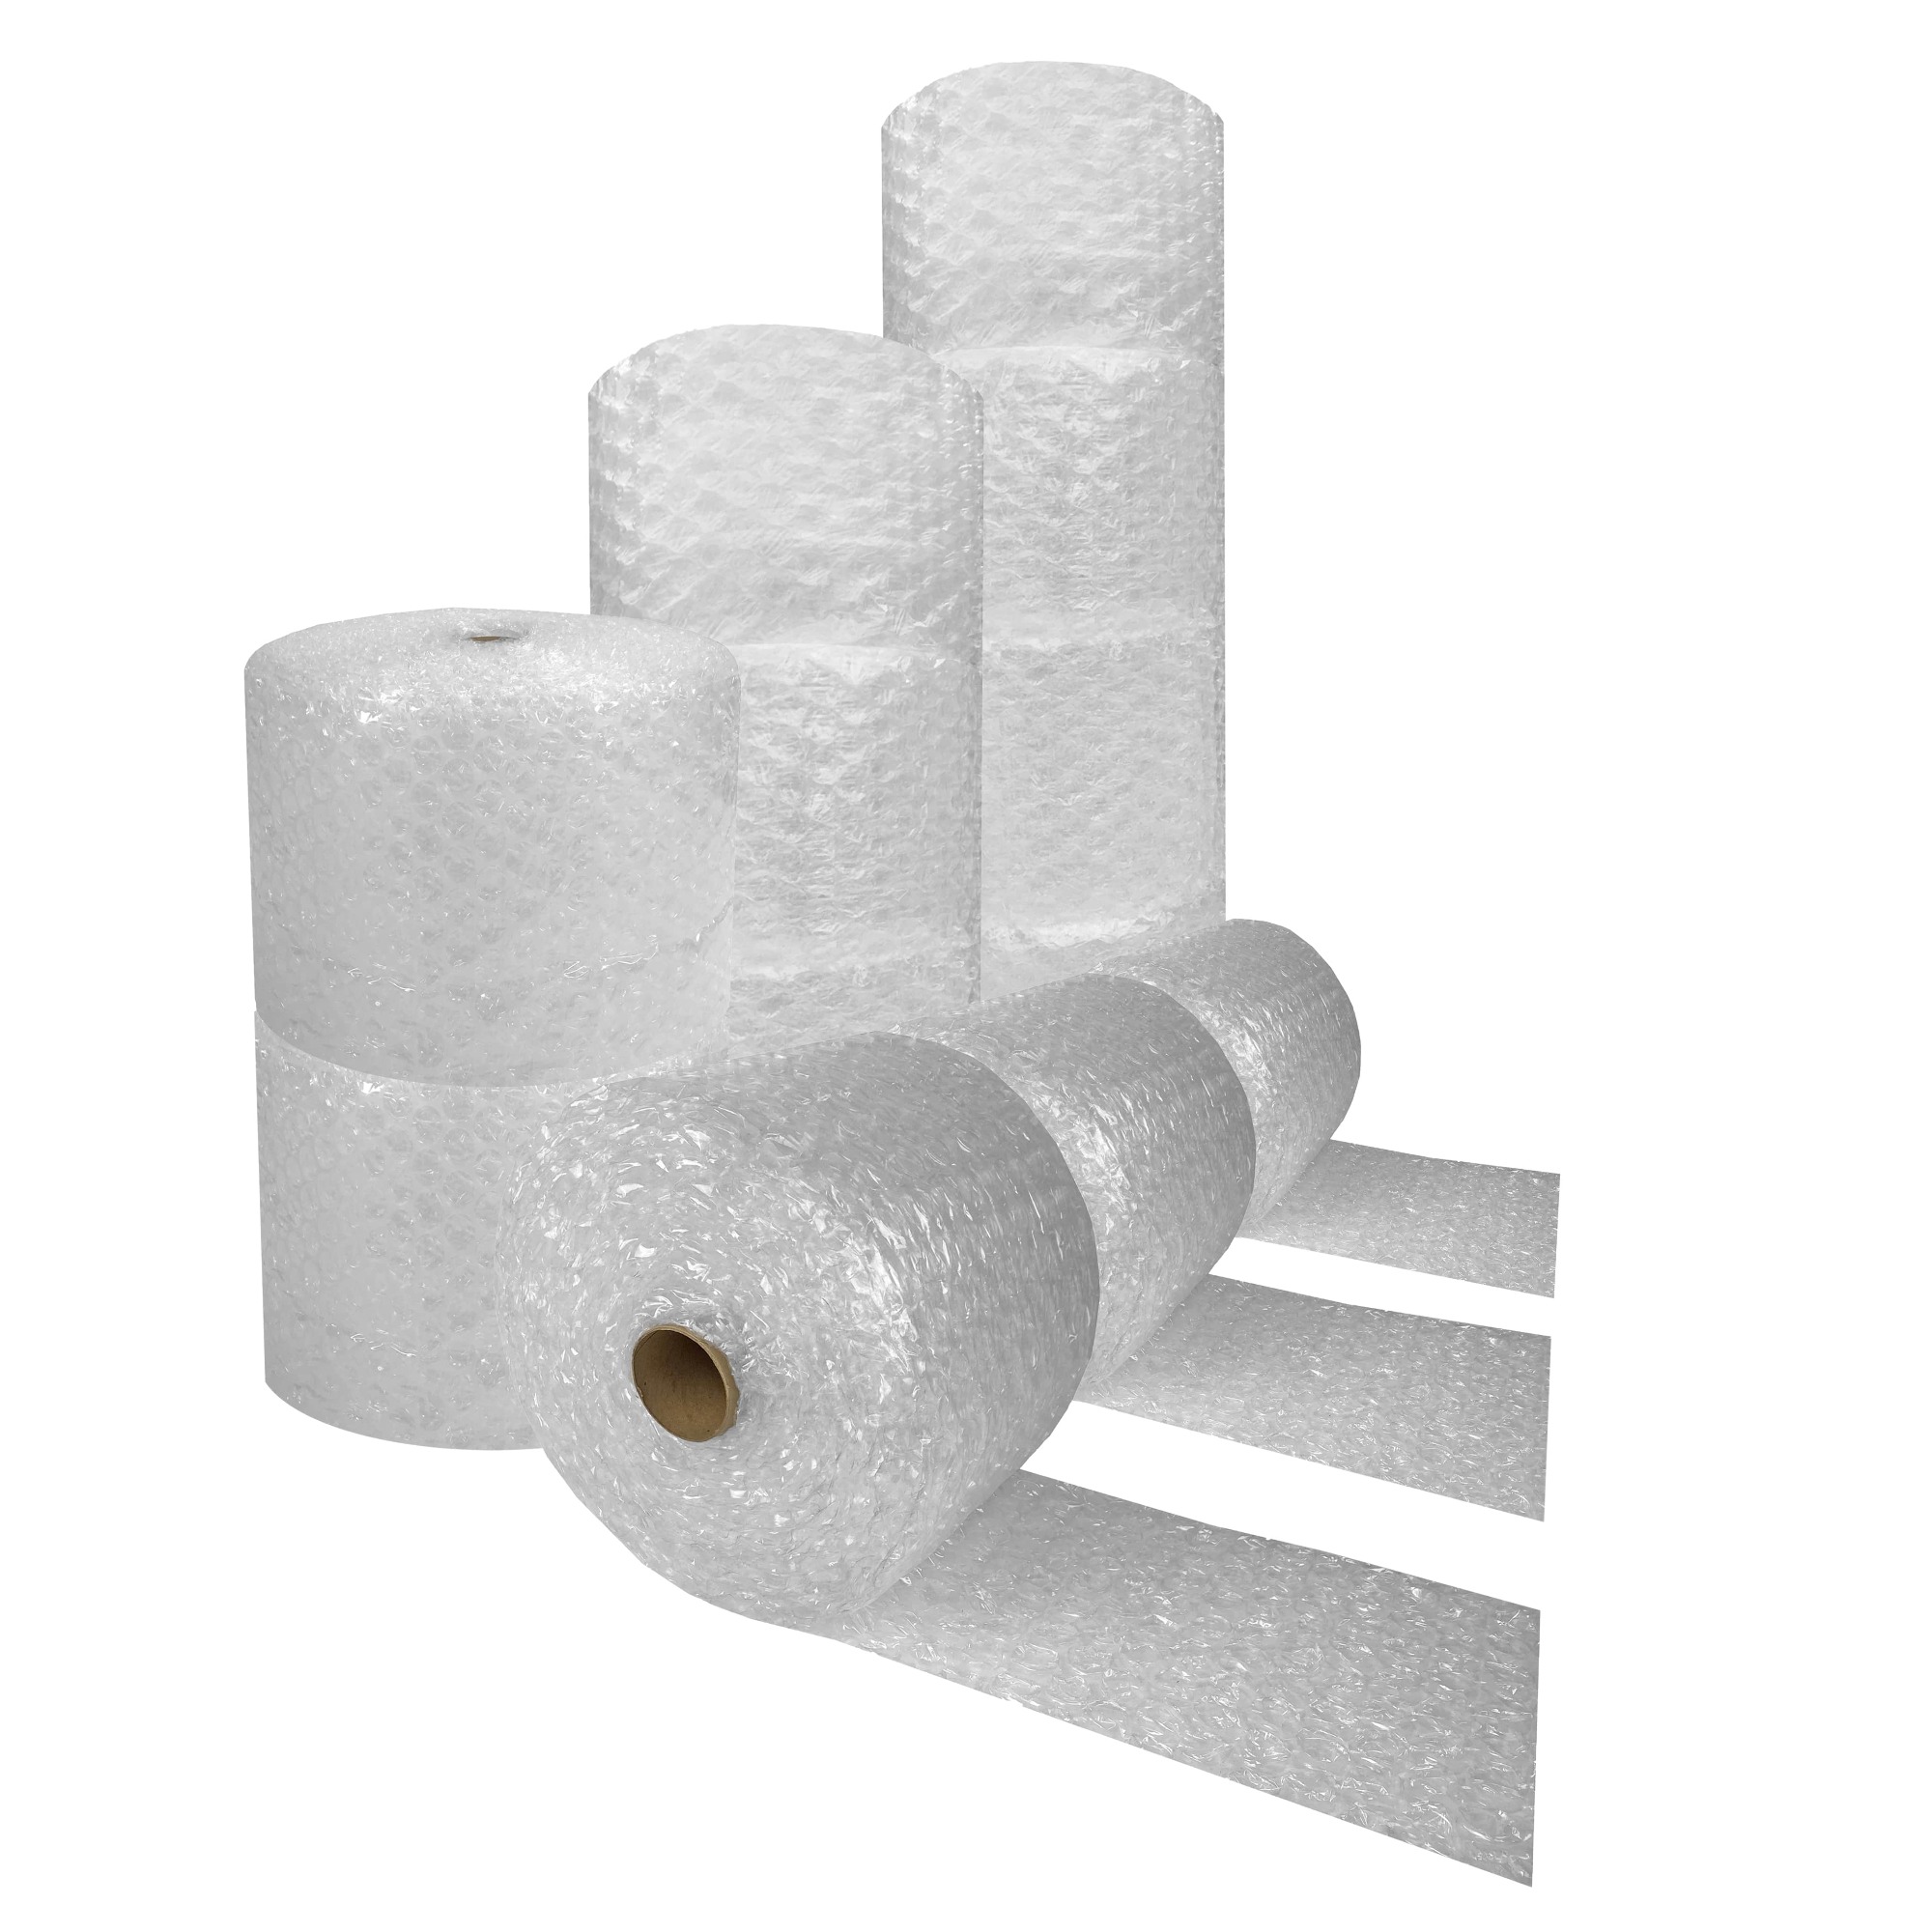 SMALL LARGE BUBBLE WRAP PACKING MOVING STORAGE ROLLS - 10M 50M 100M x ALL  WIDTHS